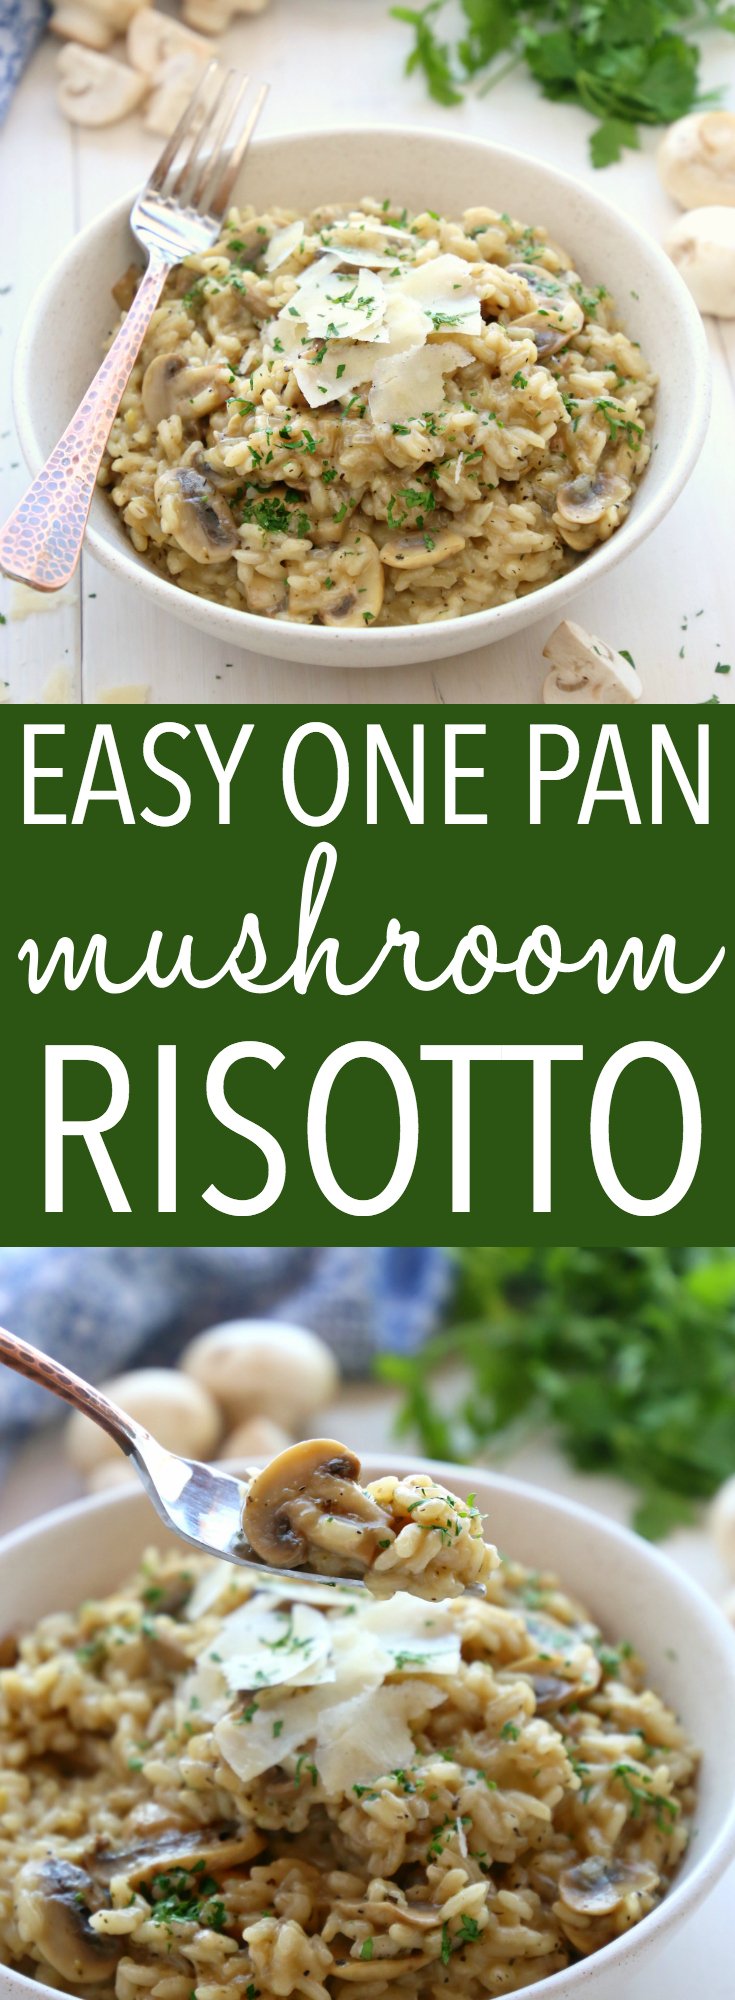 This Easy Mushroom Risotto is a quick and simple way to make restaurant-style risotto at home in minutes and in only one pan! Skip the fancy restaurant and enjoy it at home as a vegetarian main dish or side dish! Recipe from thebusybaker.ca! #easyrisotto #simplerisottorecipe #mushroomrisotto via @busybakerblog